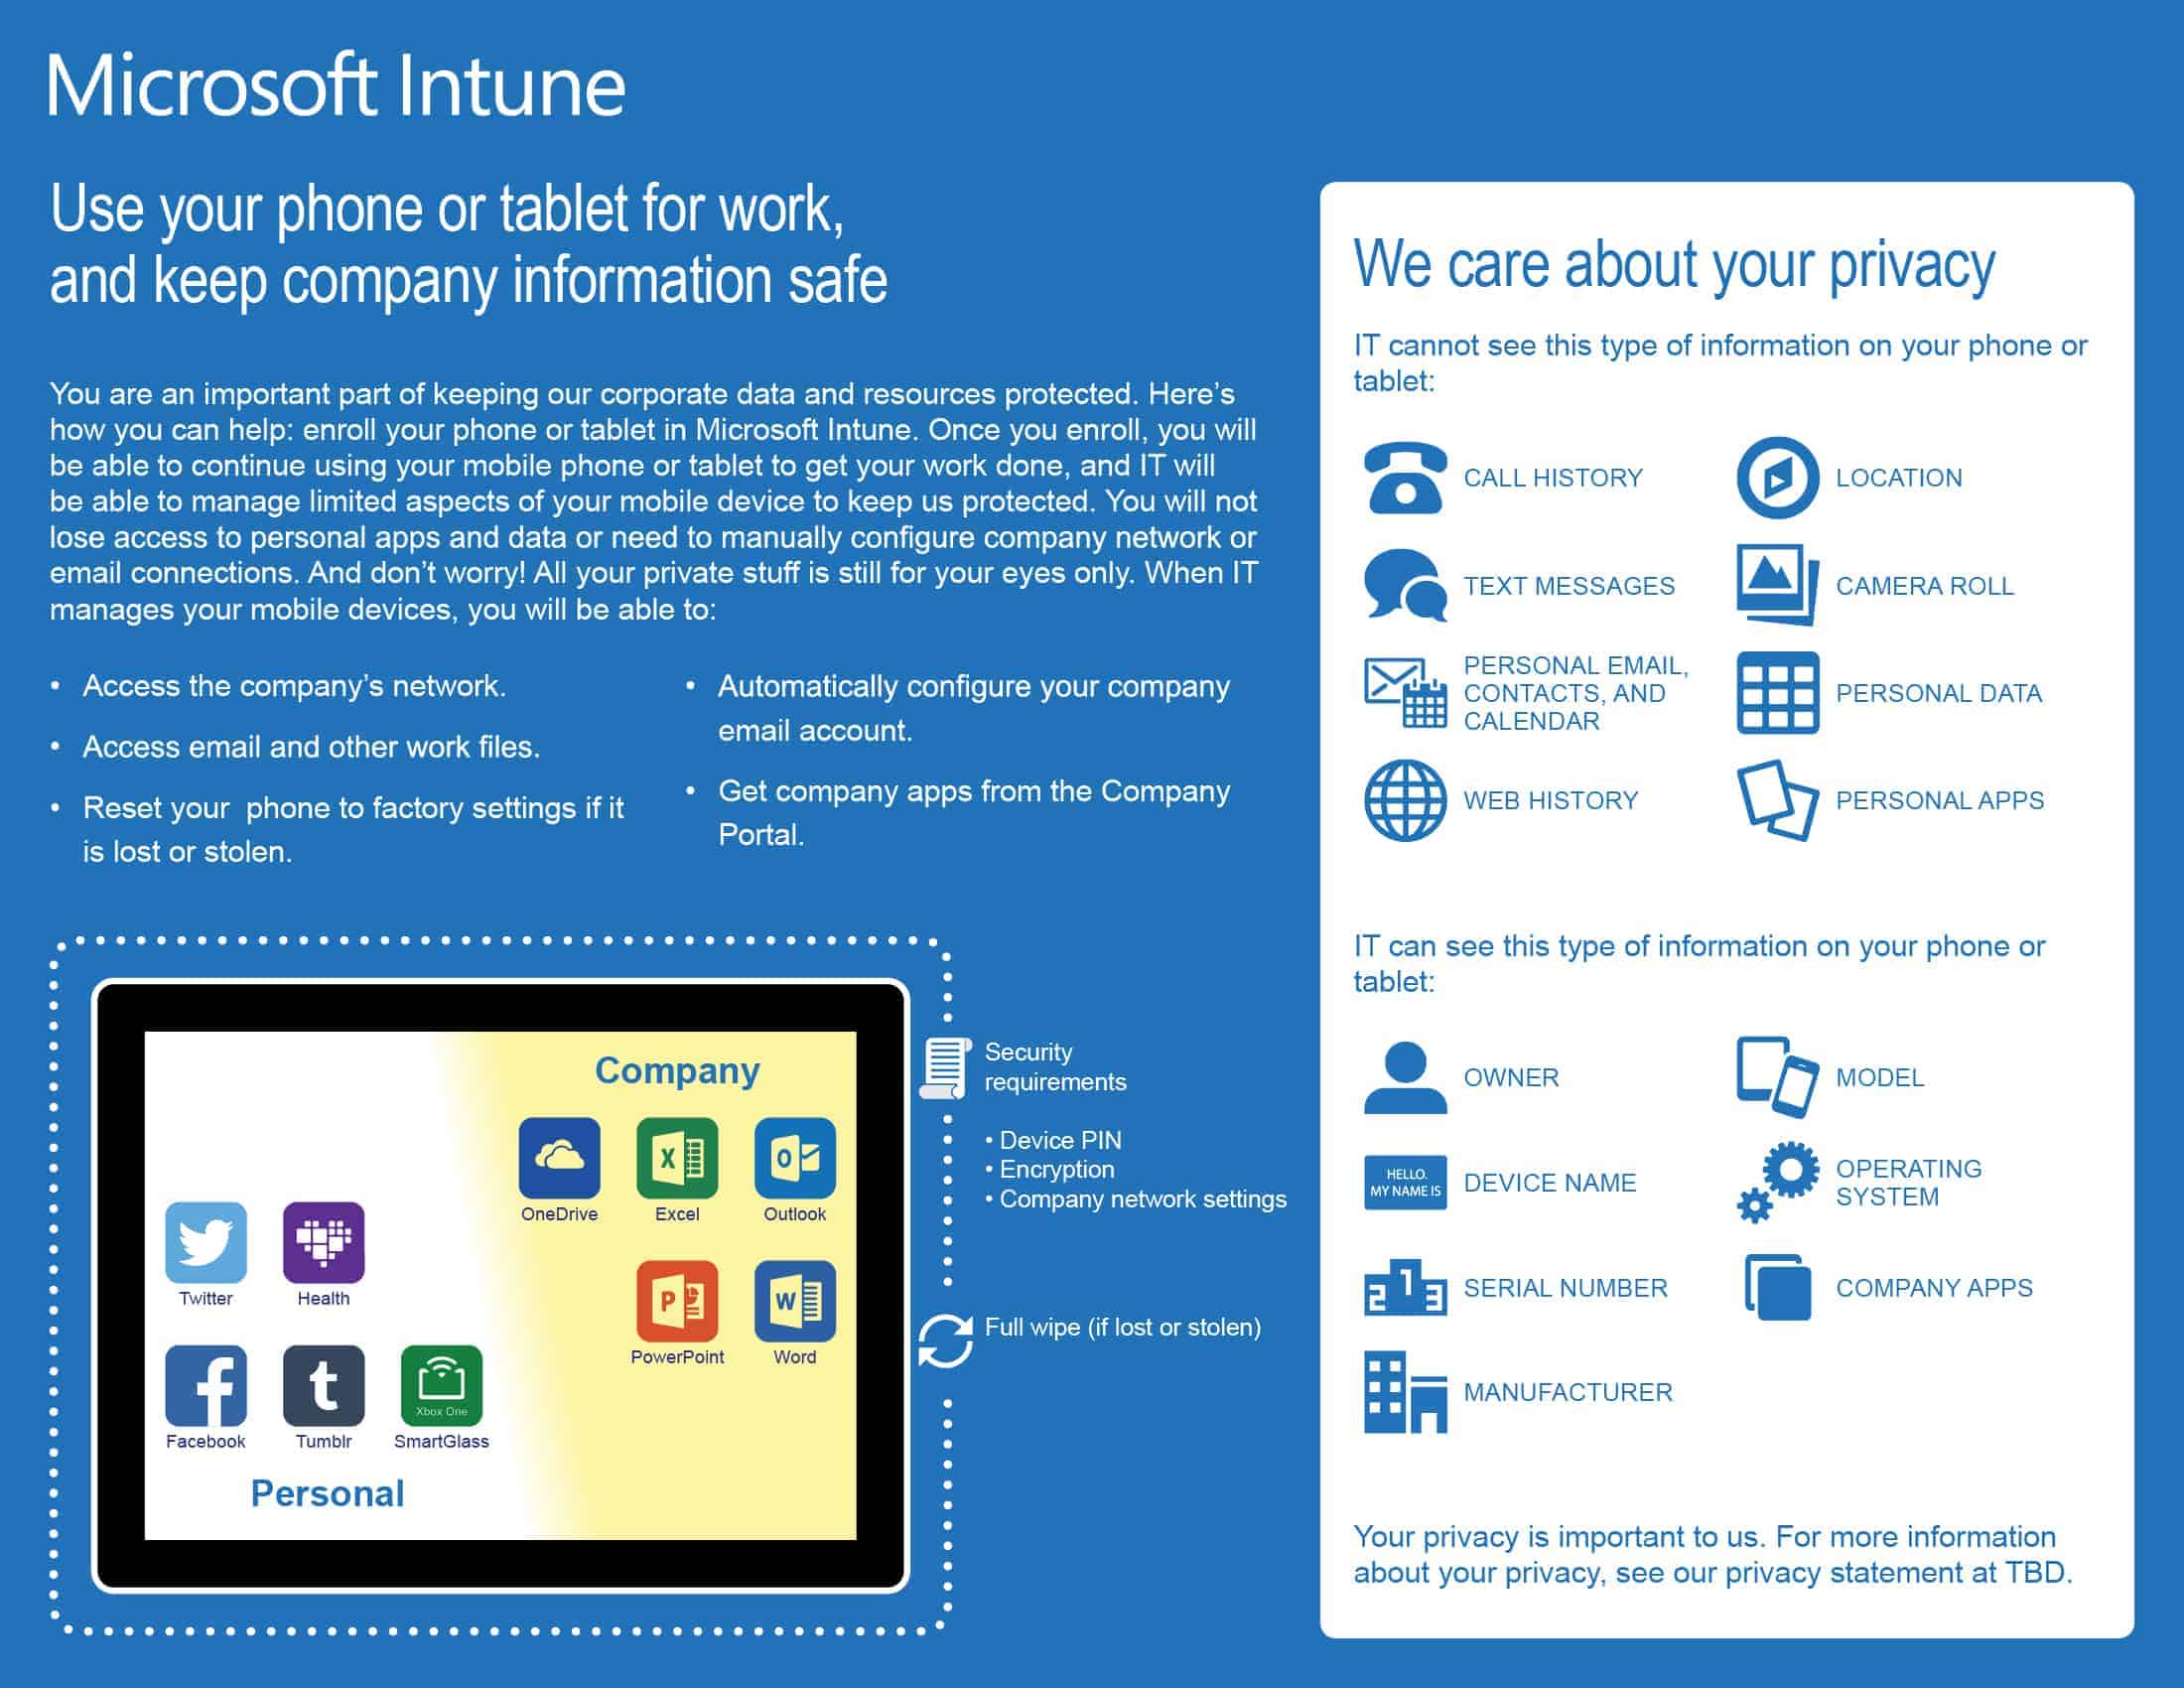 Microsoft Intune end-user handout front page